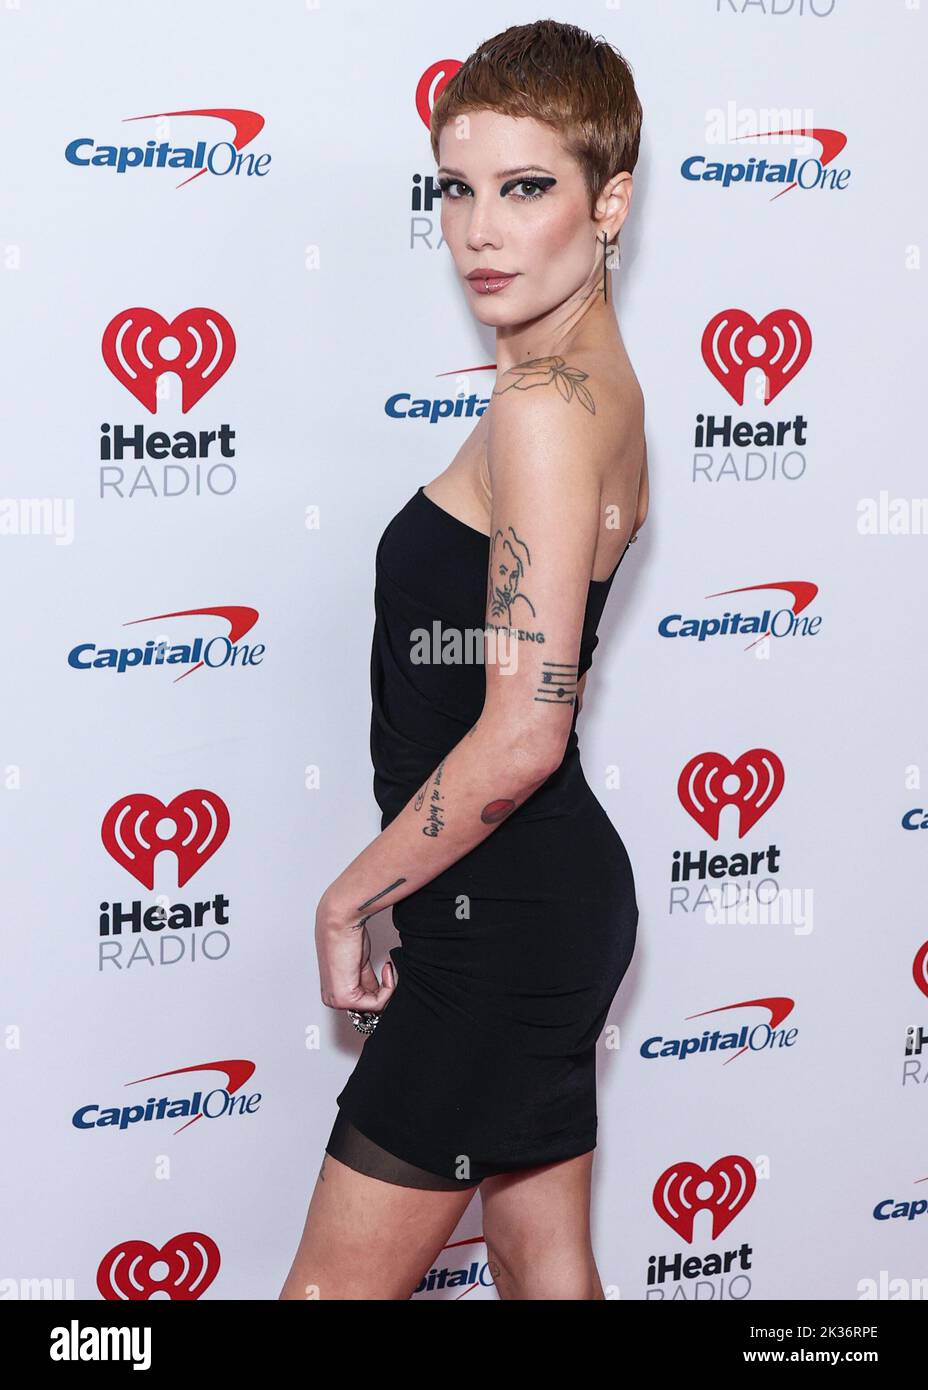 LAS VEGAS, NEVADA, USA - SEPTEMBER 24: Halsey (Ashley Nicolette Frangipane) poses in the press room at the 2022 iHeartRadio Music Festival - Night 2 held at the T-Mobile Arena on September 24, 2022 in Las Vegas, Nevada, United States. (Photo by Xavier Collin/Image Press Agency) Stock Photo